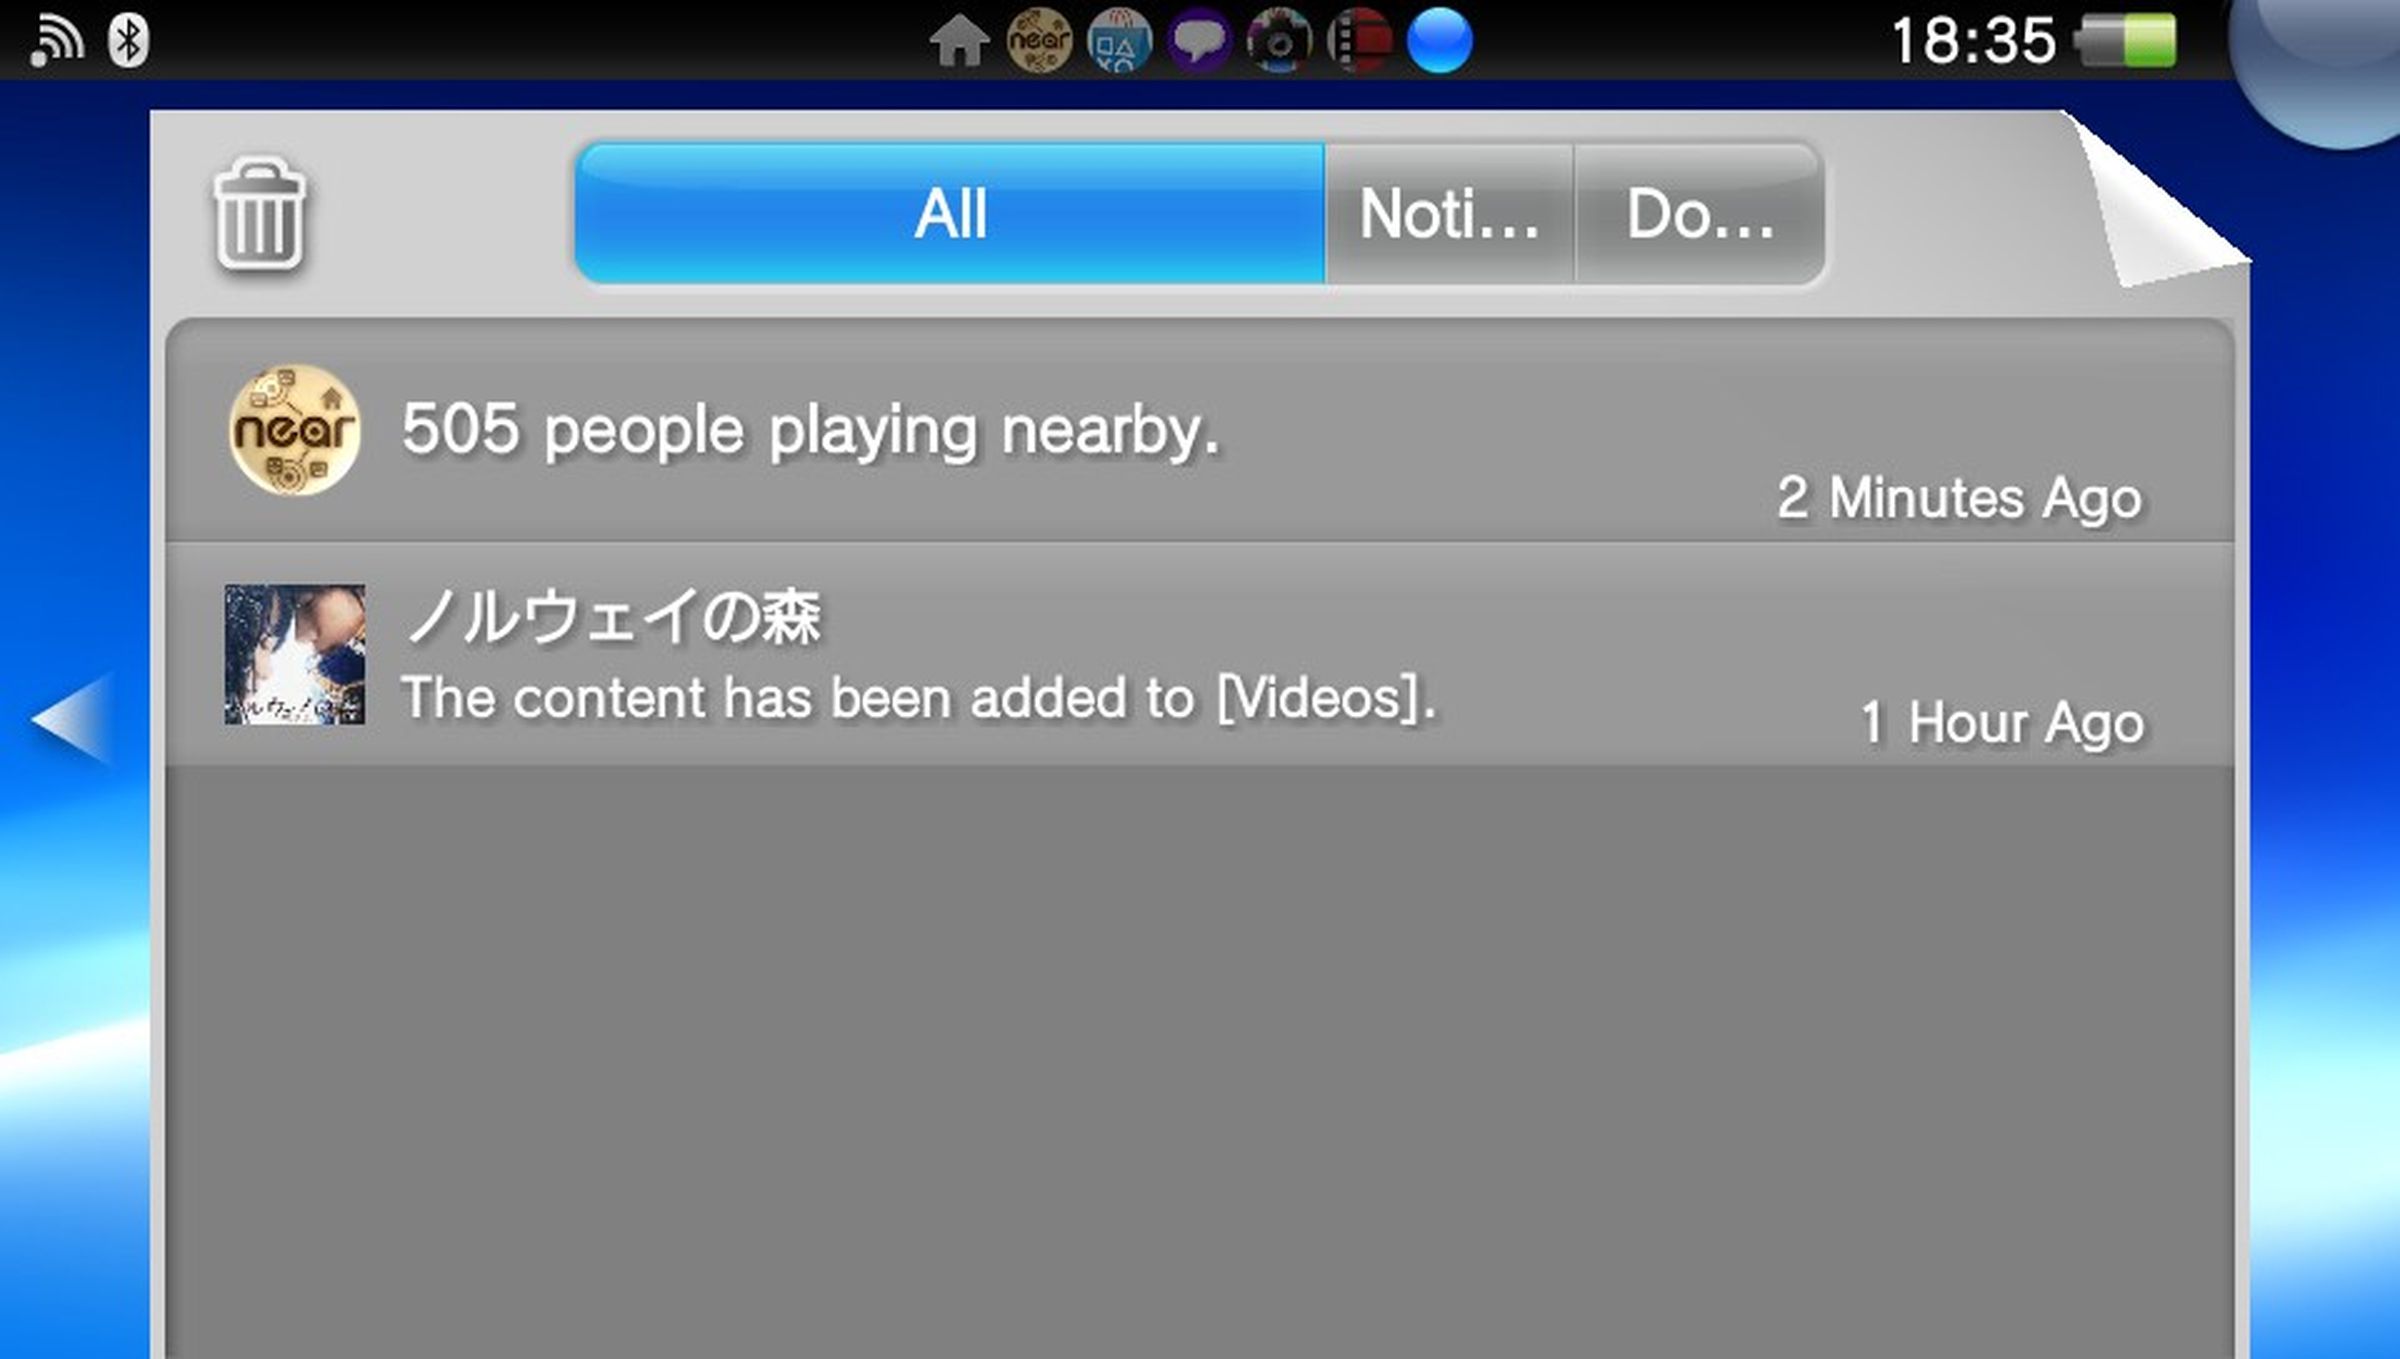 PlayStation Vita software and apps